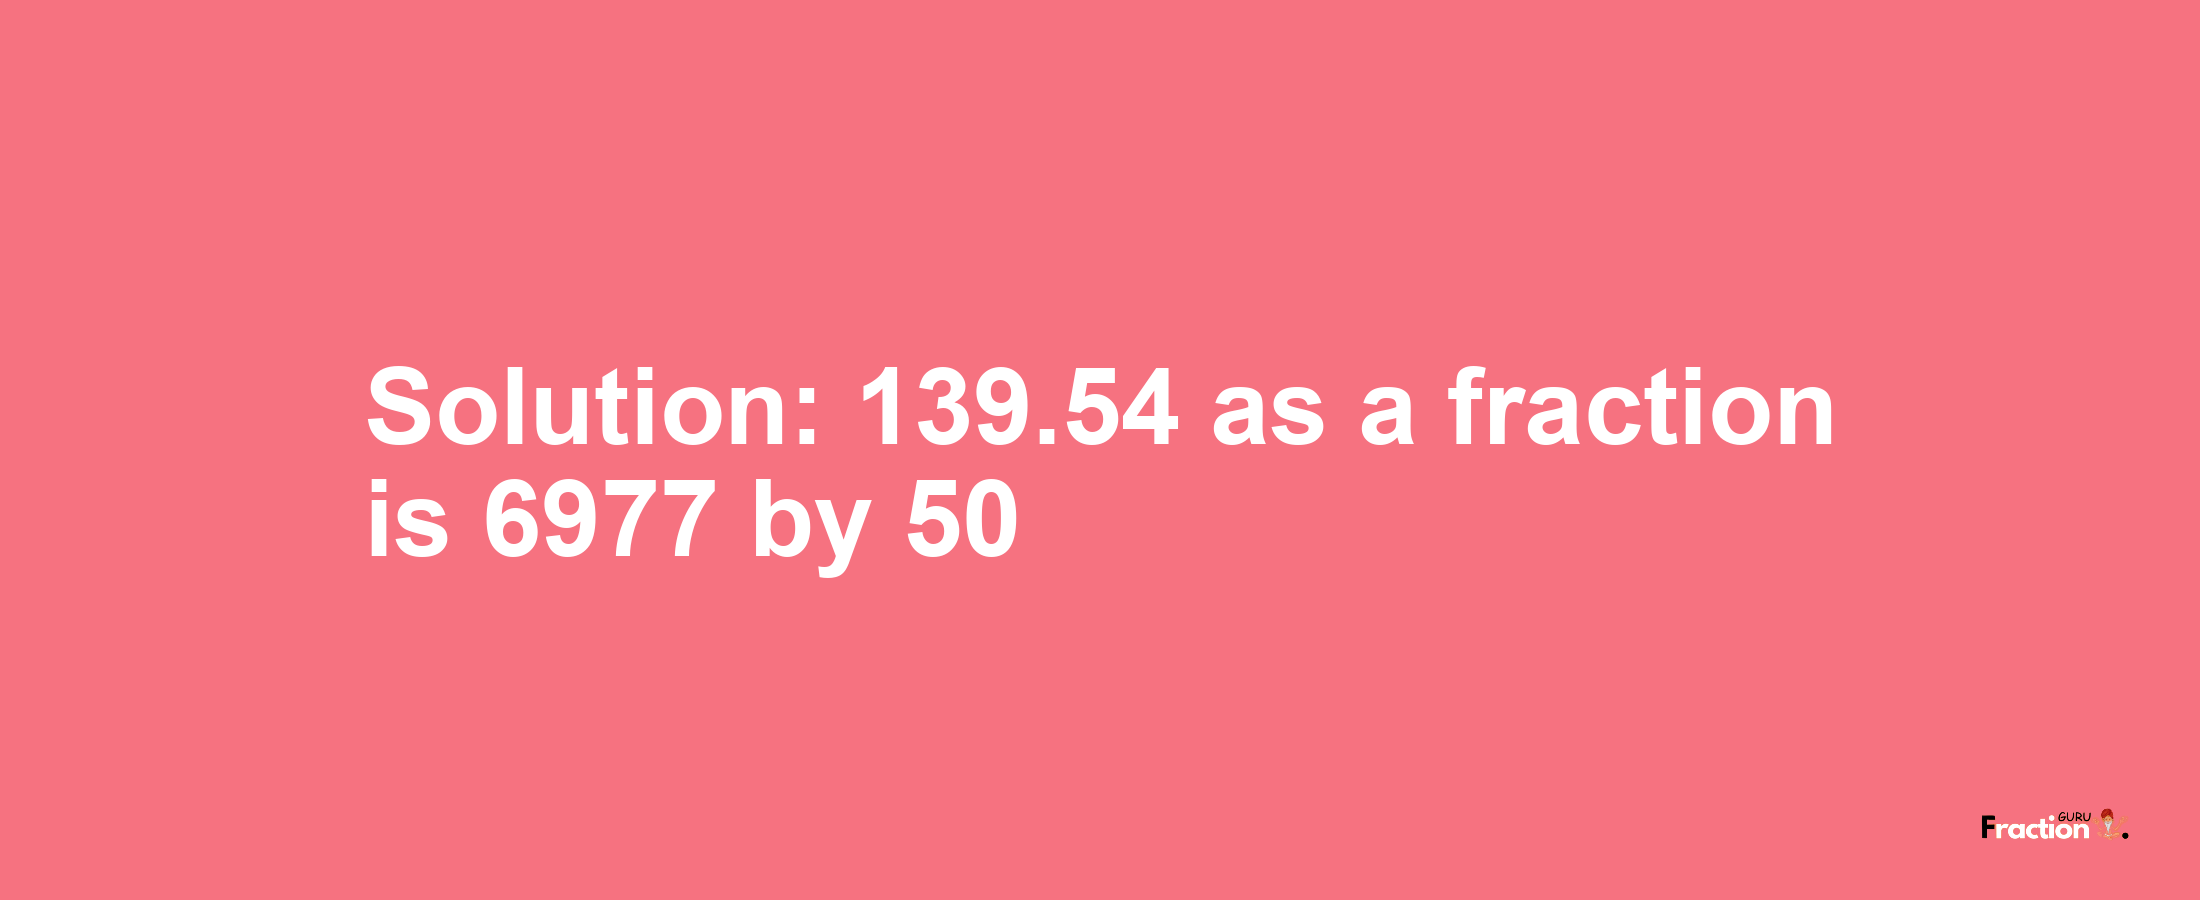 Solution:139.54 as a fraction is 6977/50